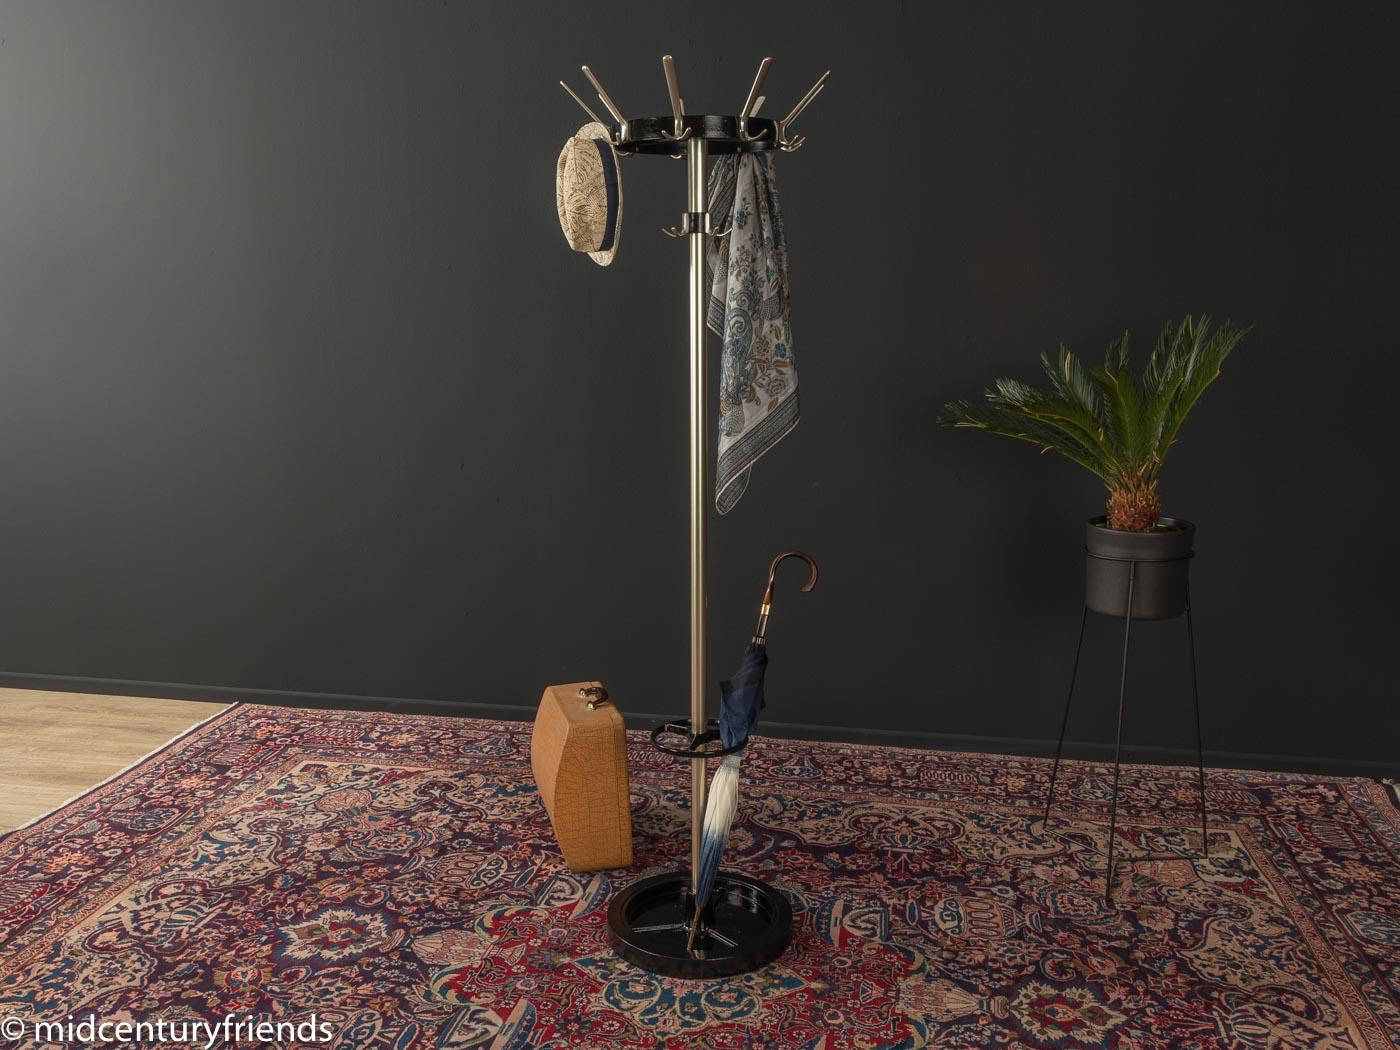 Classic hatstand from the 1960s. High quality, heavy stainless steel frame with nine hooks, an umbrella holder and a metal foot. The umbrella holder and the base are painted black. Made in Germany. 